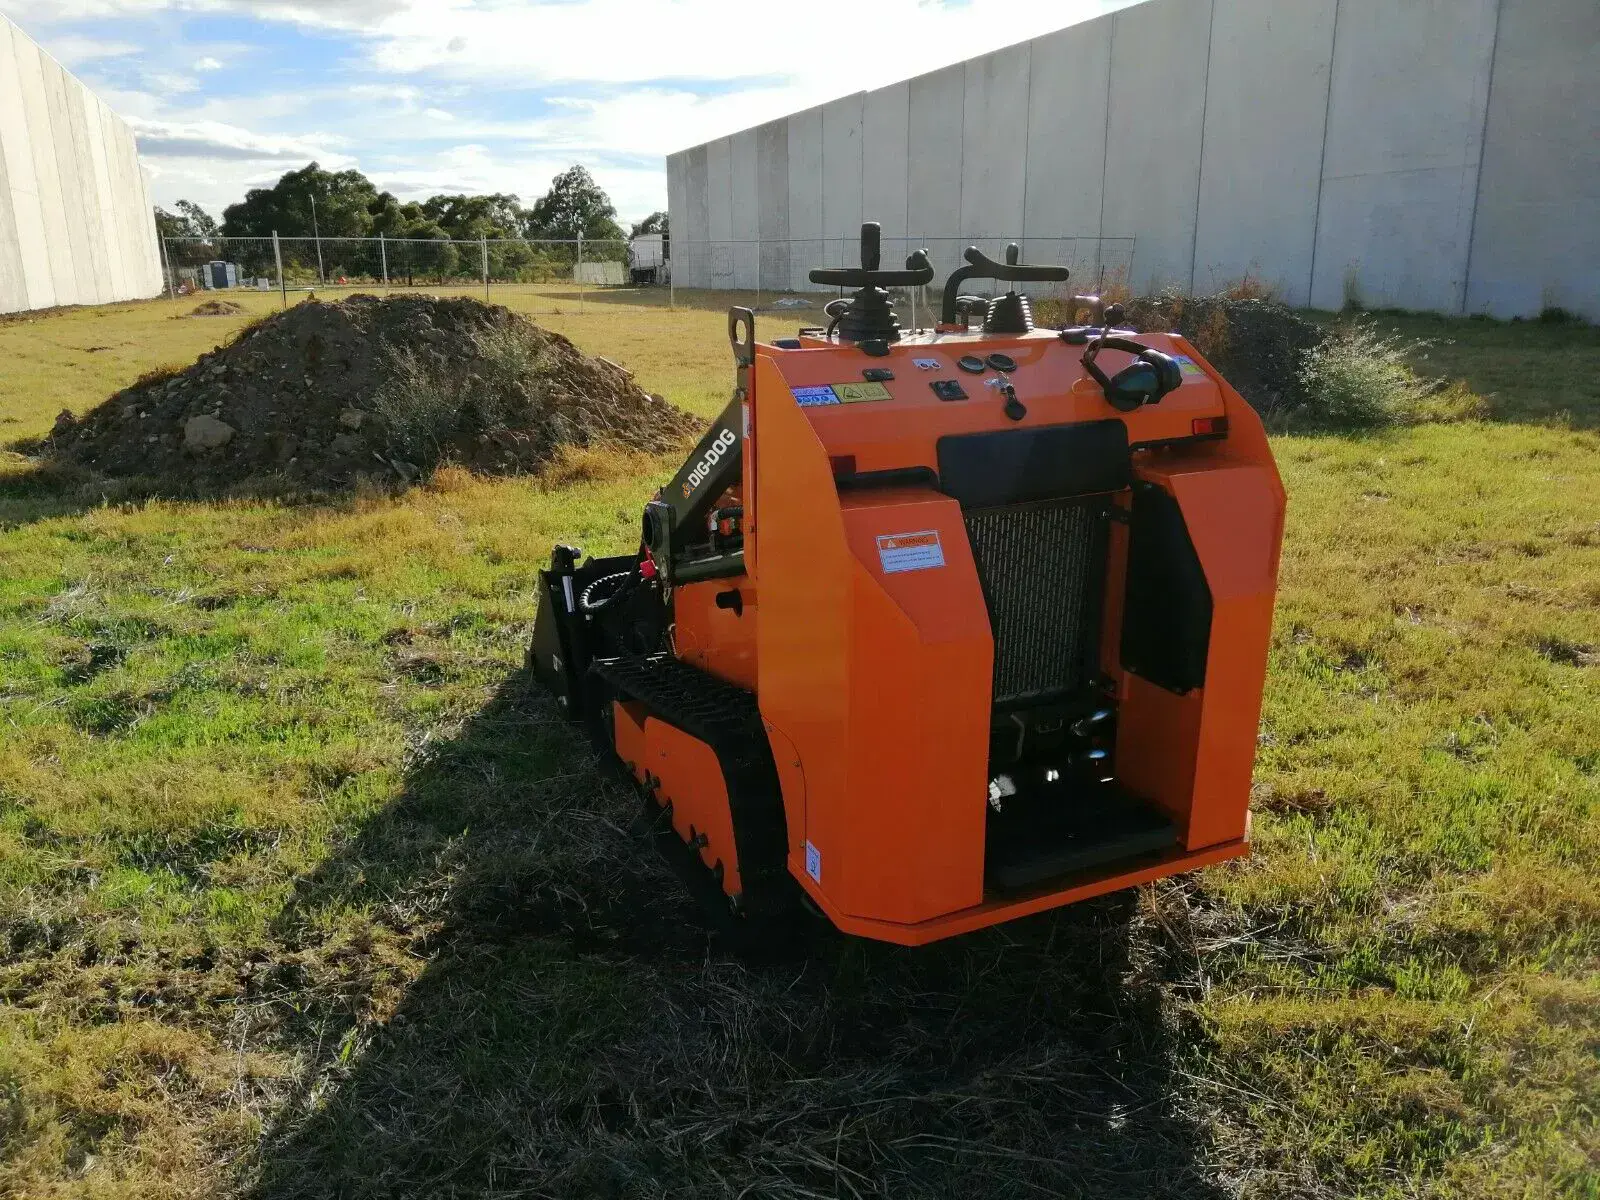 The Future of Articulating Skid Steers